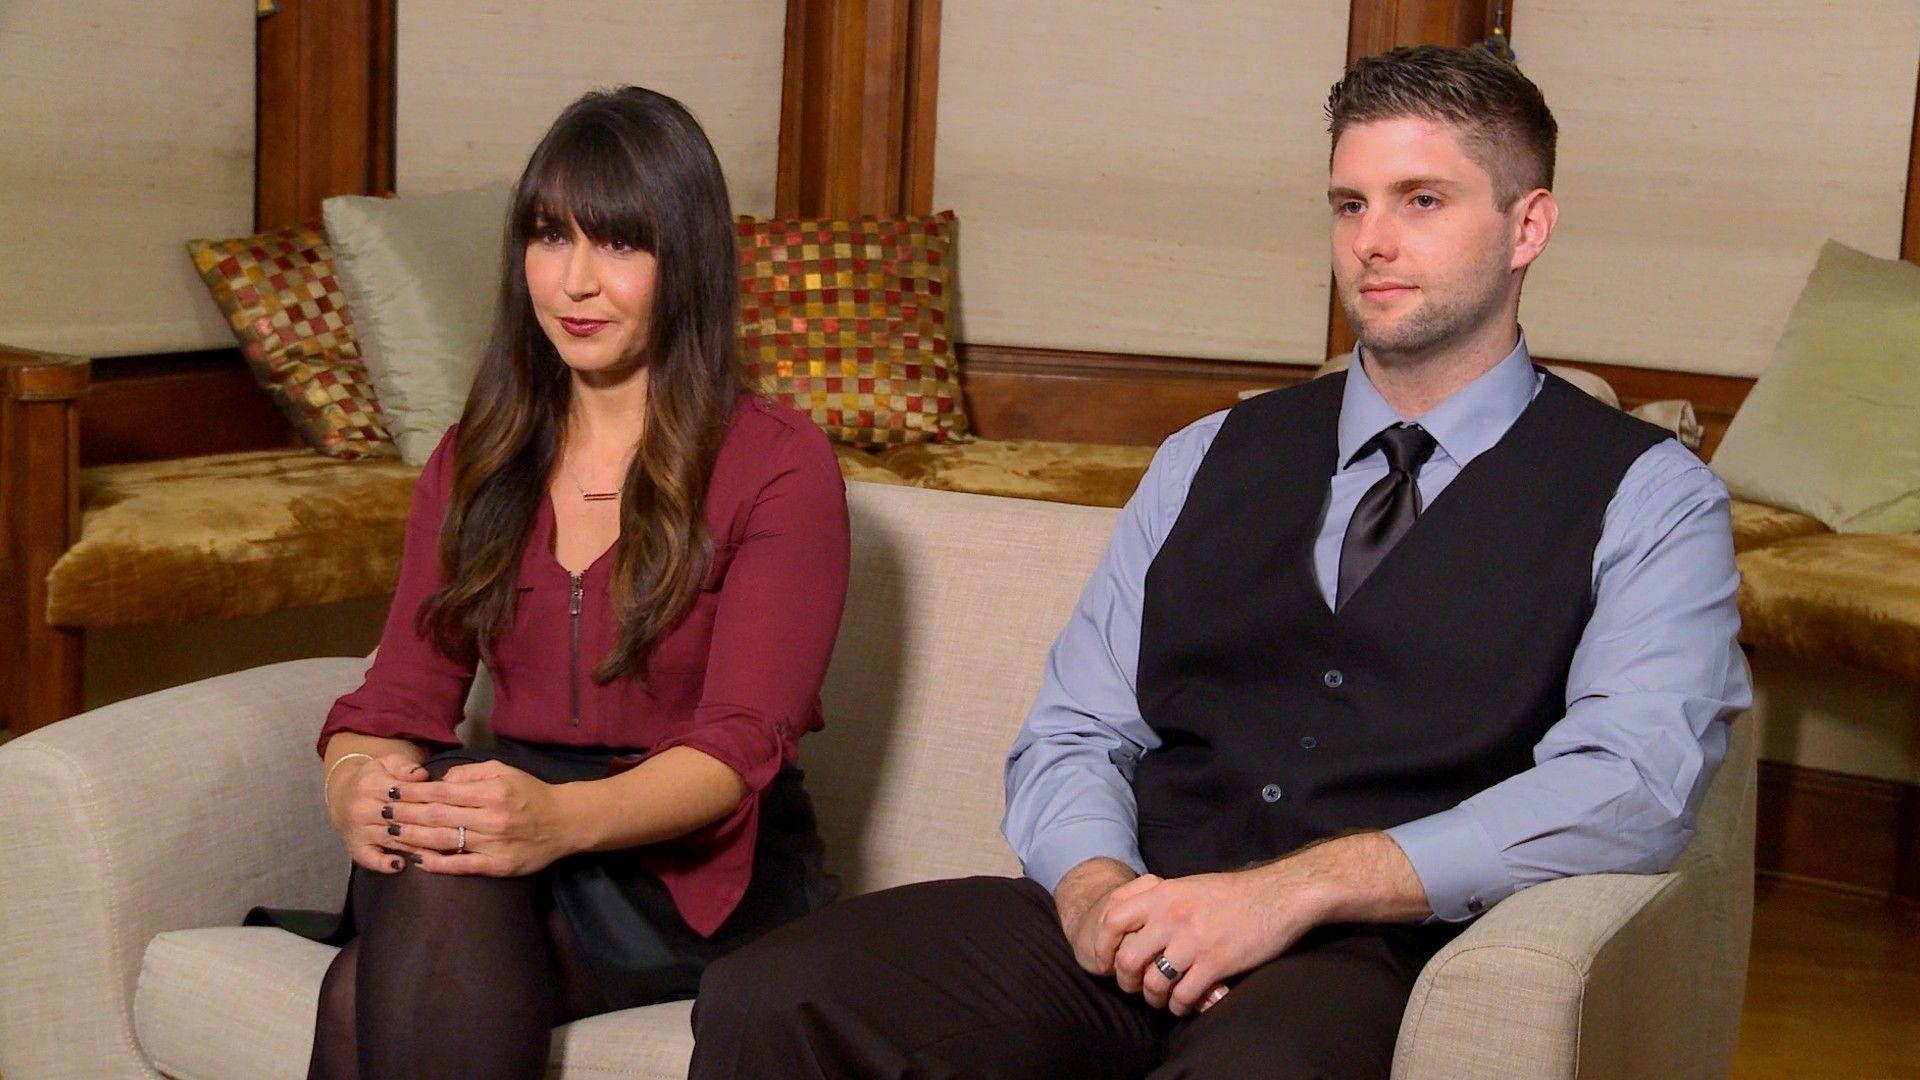 Married at First Sight' couple from Chicago area splits